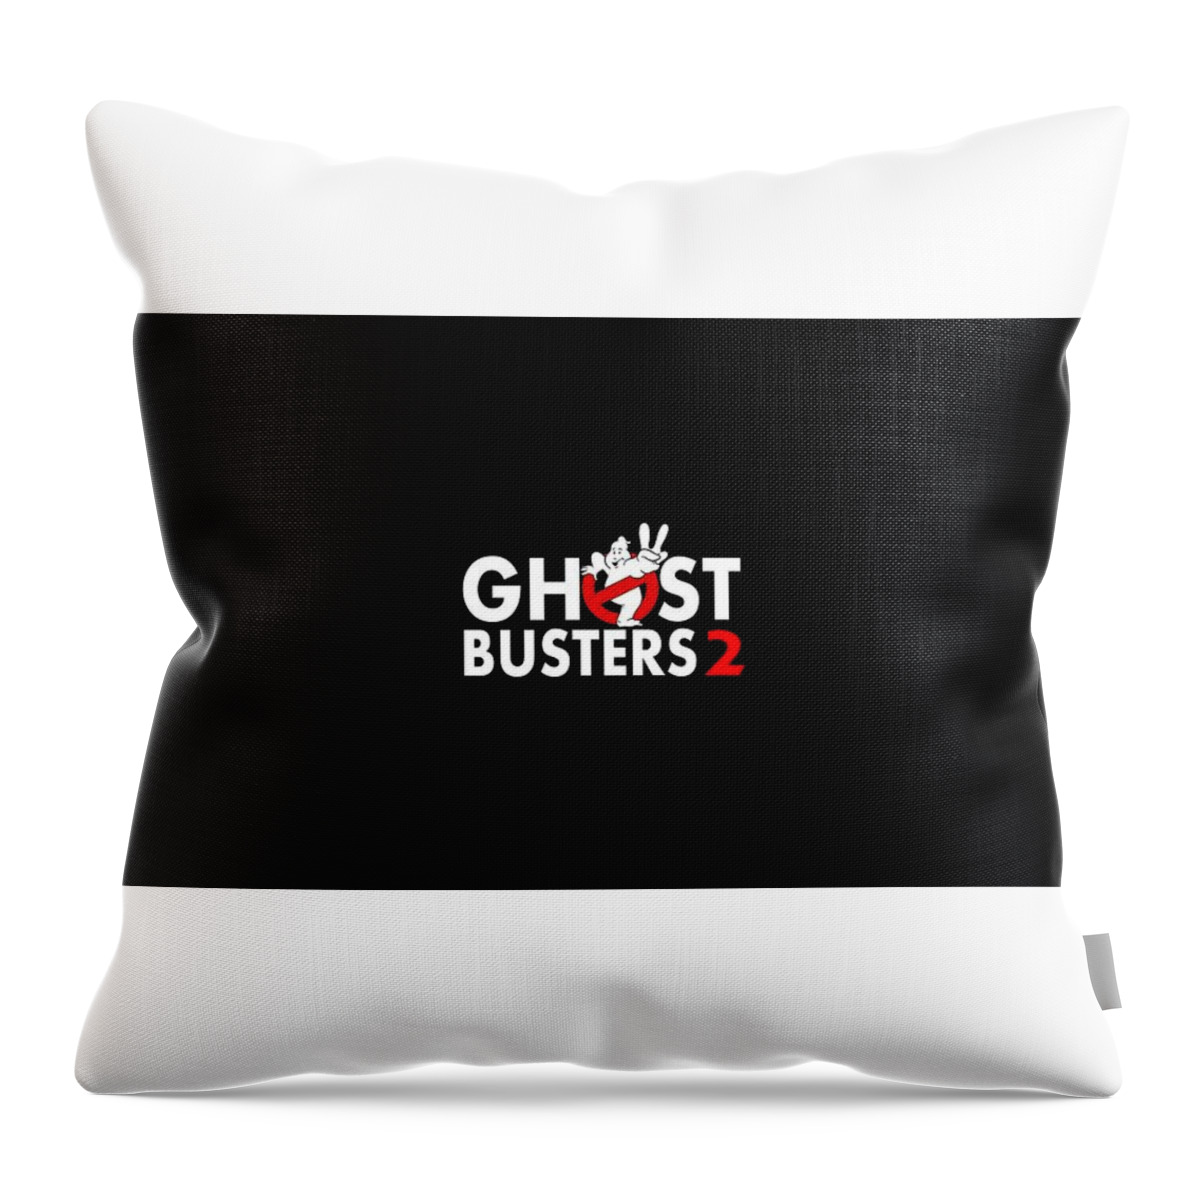 Ghostbusters Ii Throw Pillow featuring the digital art Ghostbusters II by Super Lovely